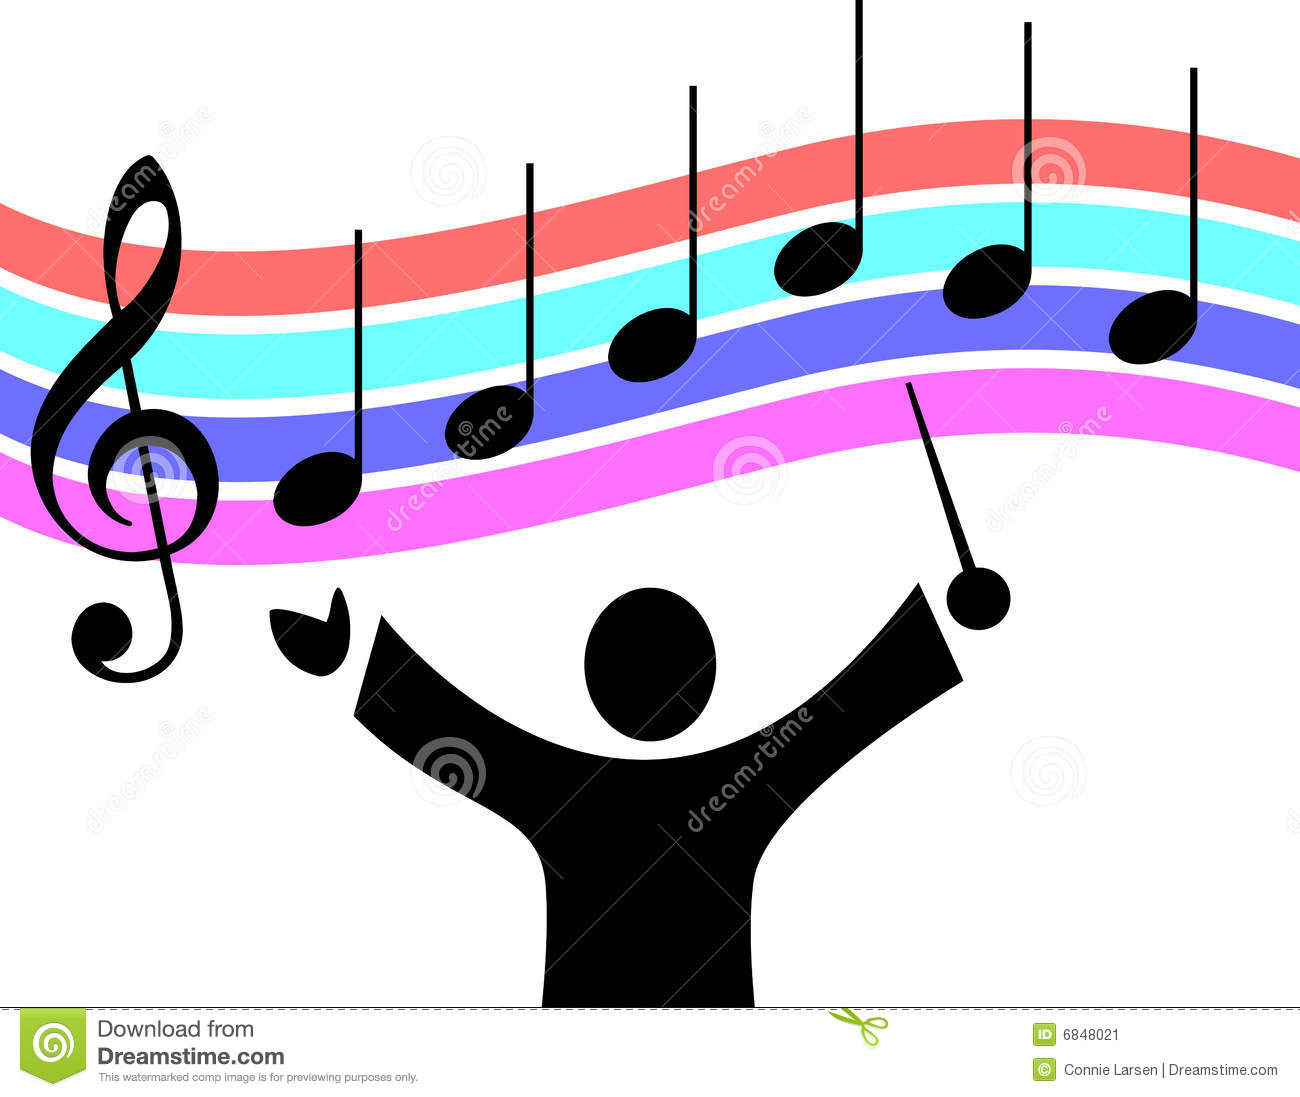 Musician clipart musical director. Music graphics free download